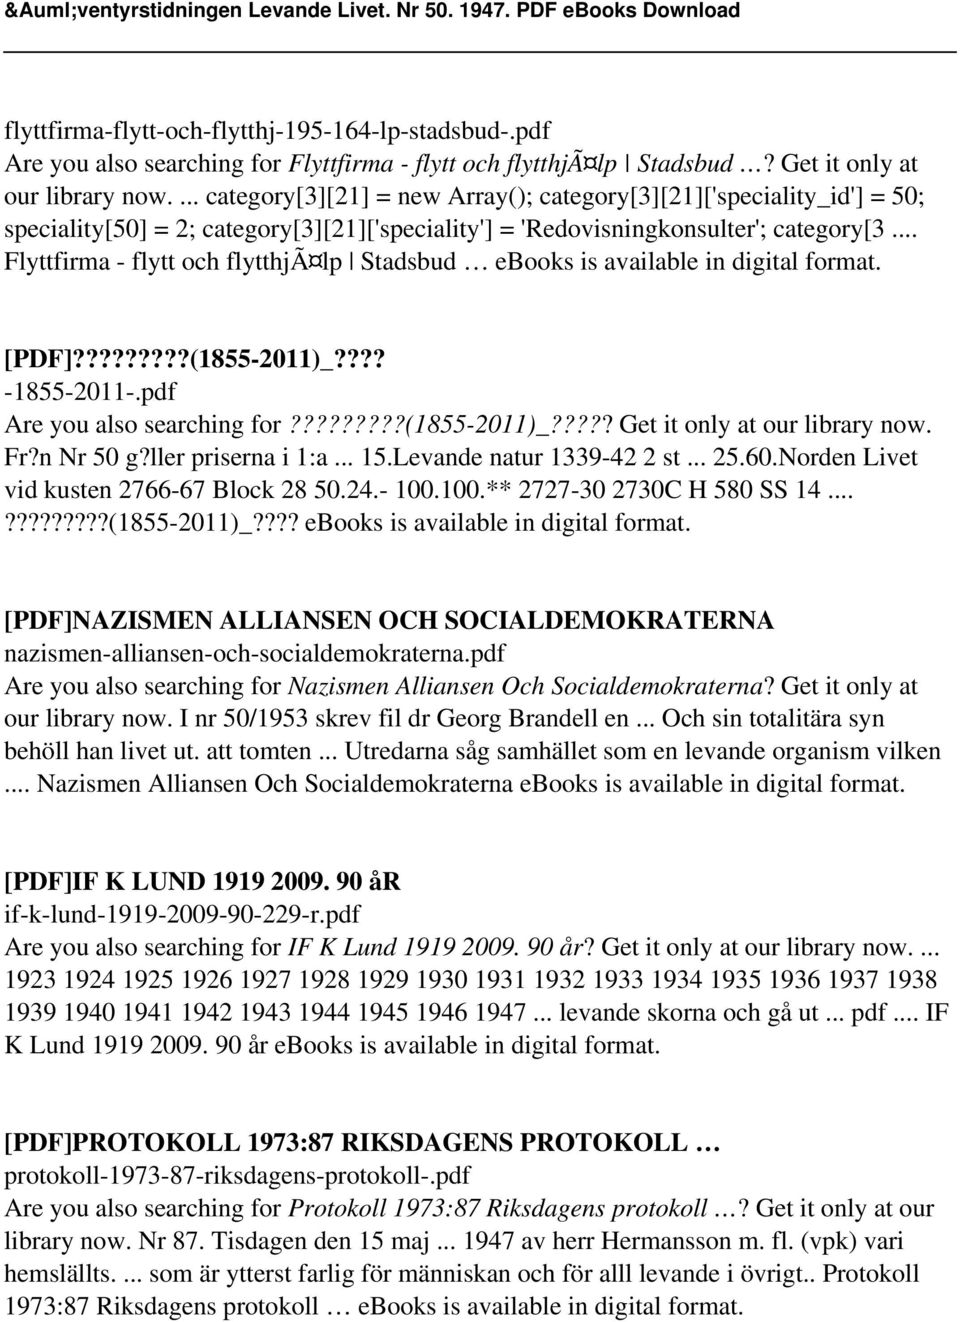 .. Flyttfirma - flytt och flytthjã lp Stadsbud ebooks is available in digital format. [PDF]?????????(1855-2011)_???? -1855-2011-.pdf Are you also searching for?????????(1855-2011)_????? Get it only at our library now.